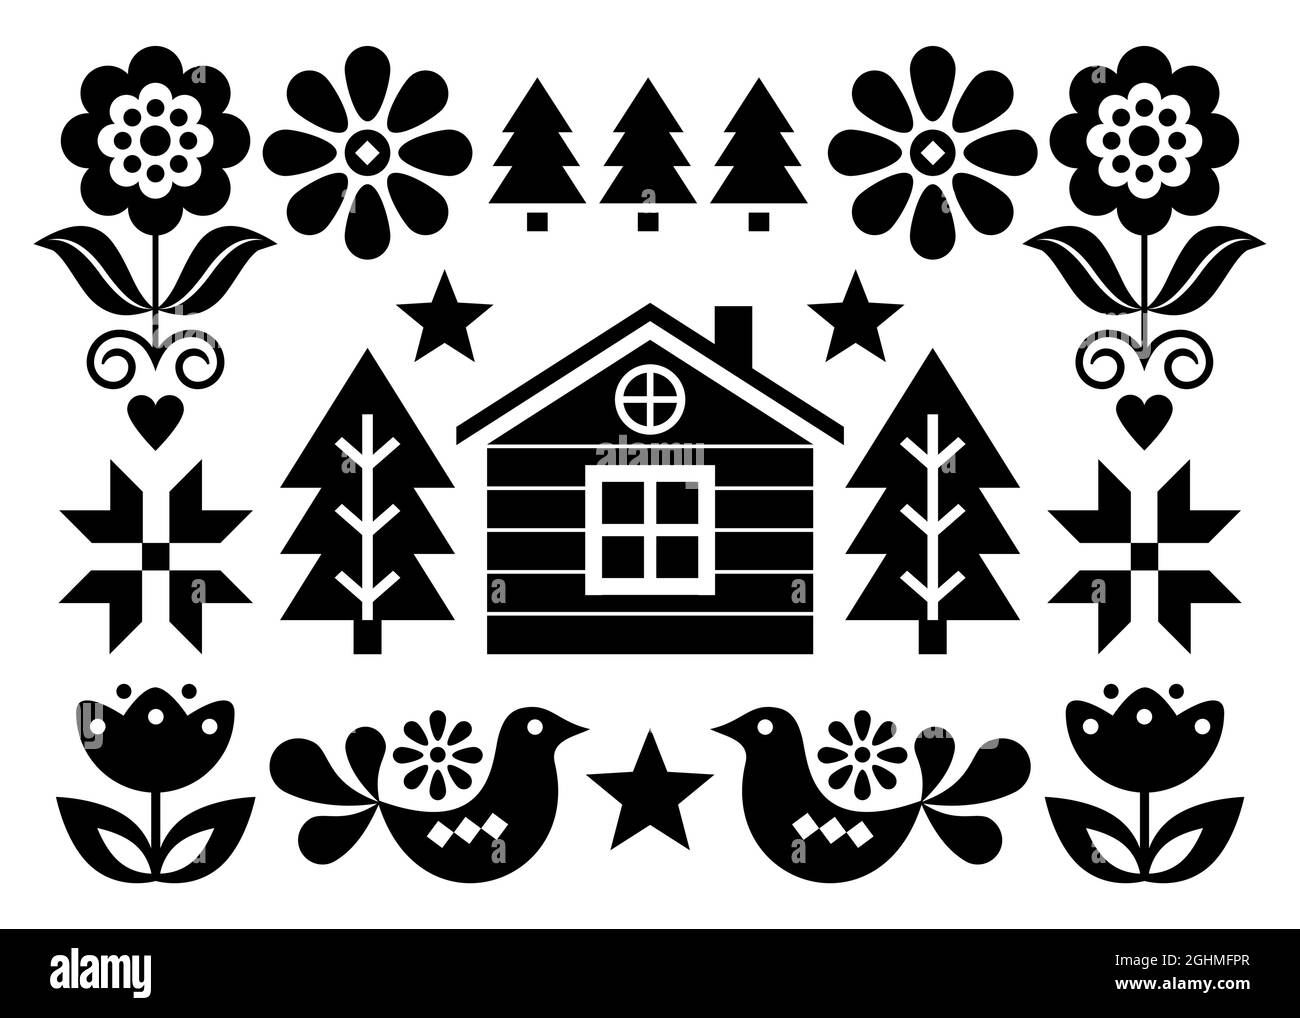 Christmas Scandinavian folk art vector greeting card design in 5x7 format with Christmas trees, birds, flowers and Finnish house - black and white Stock Vector